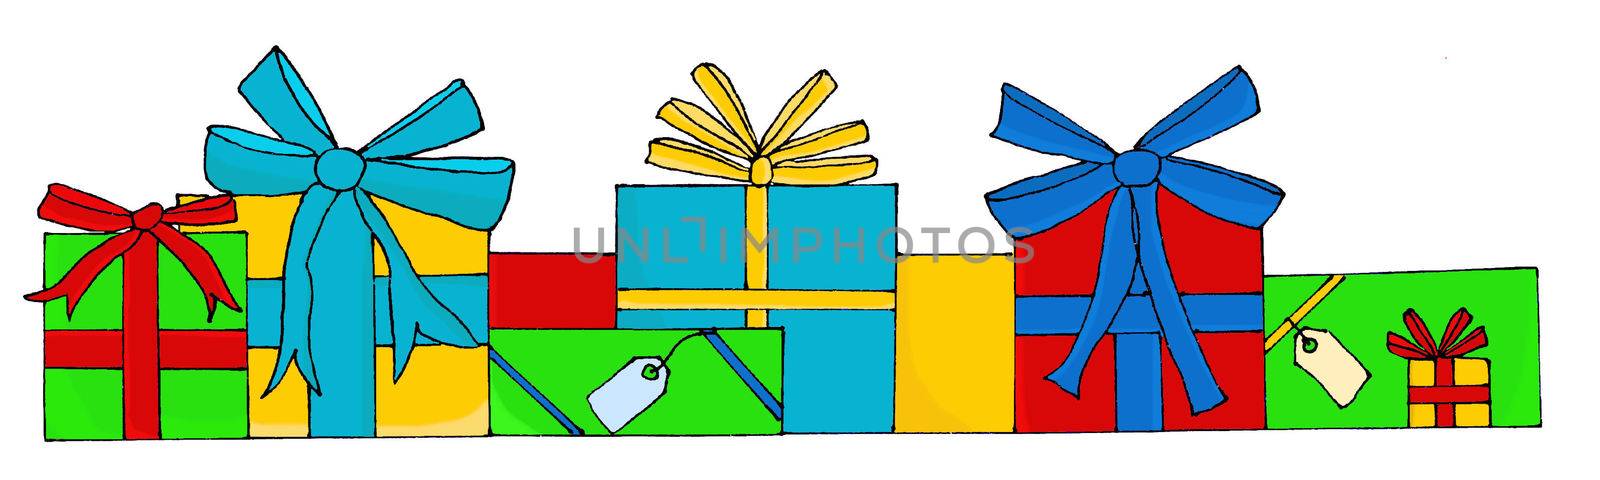 Hand drawn gift boxes in basic colors